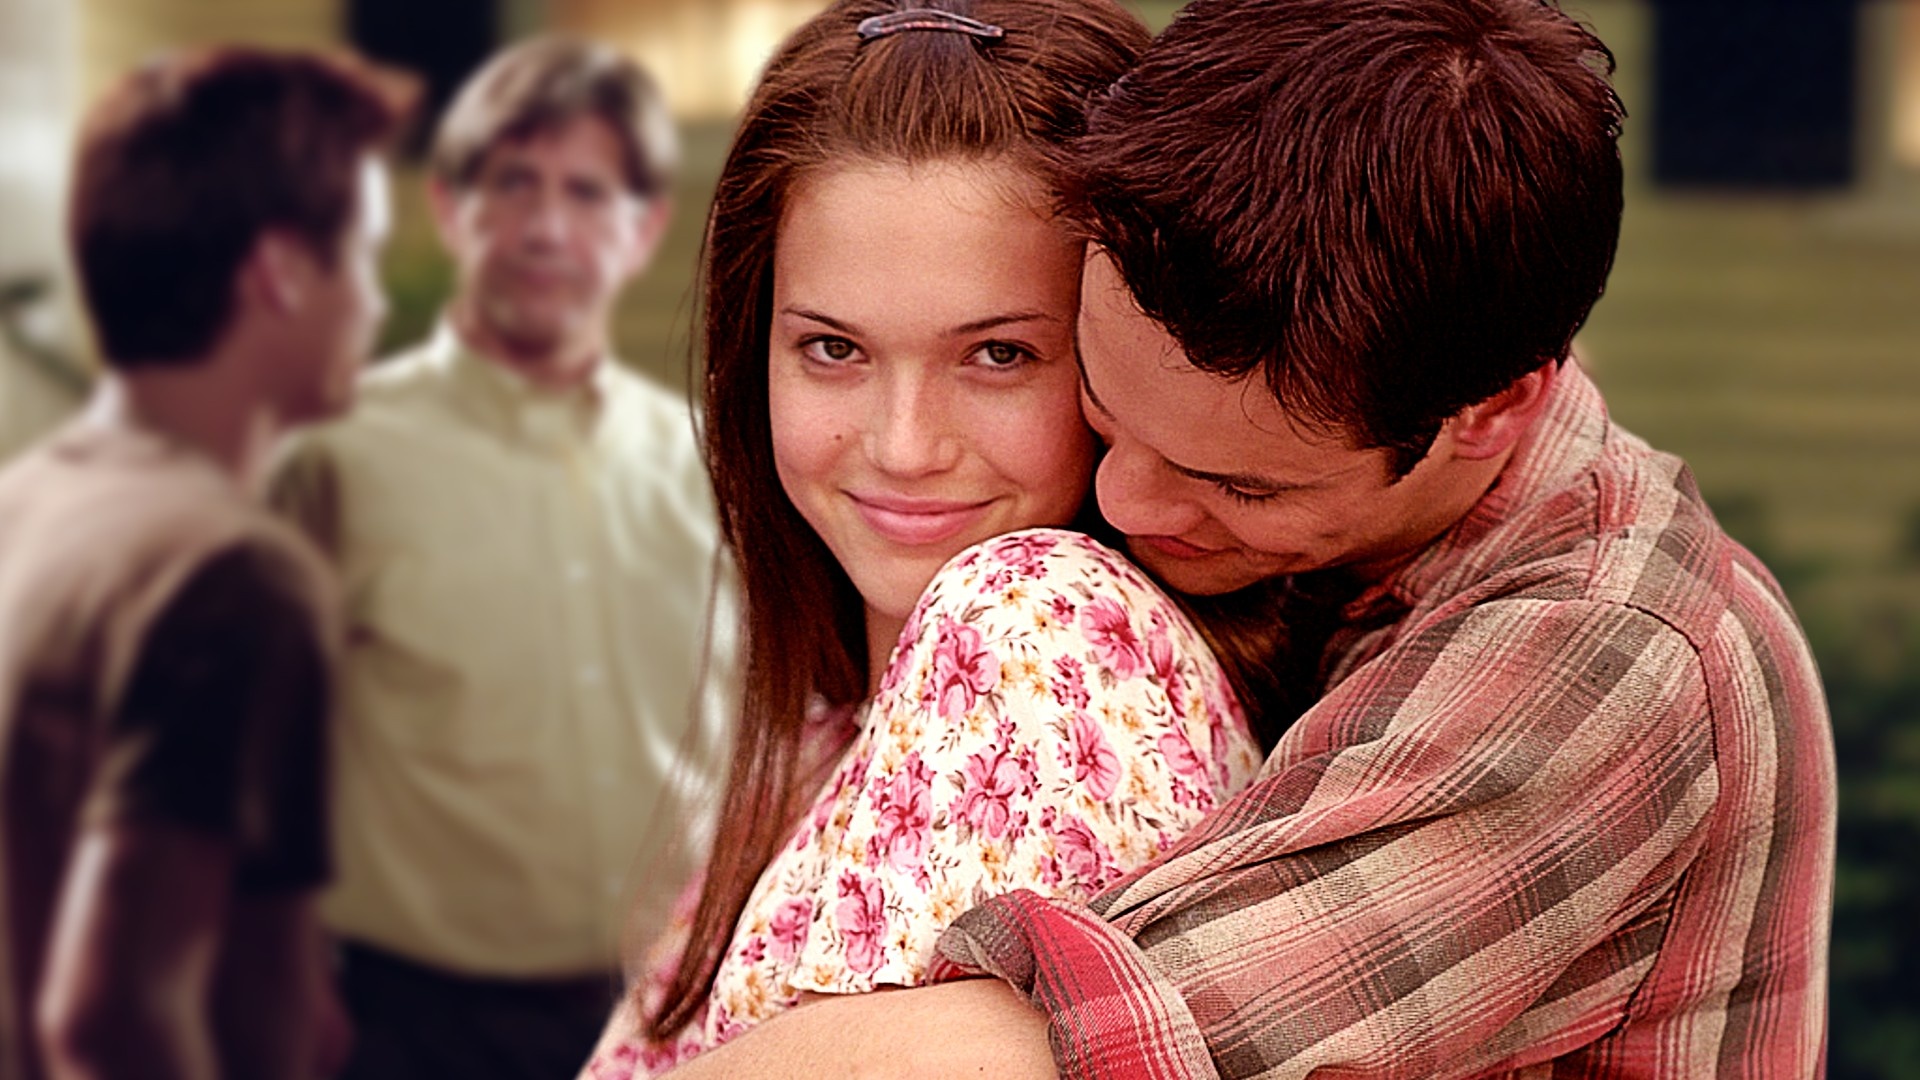 A Walk To Remember: 10 Behind-the-scenes Facts About